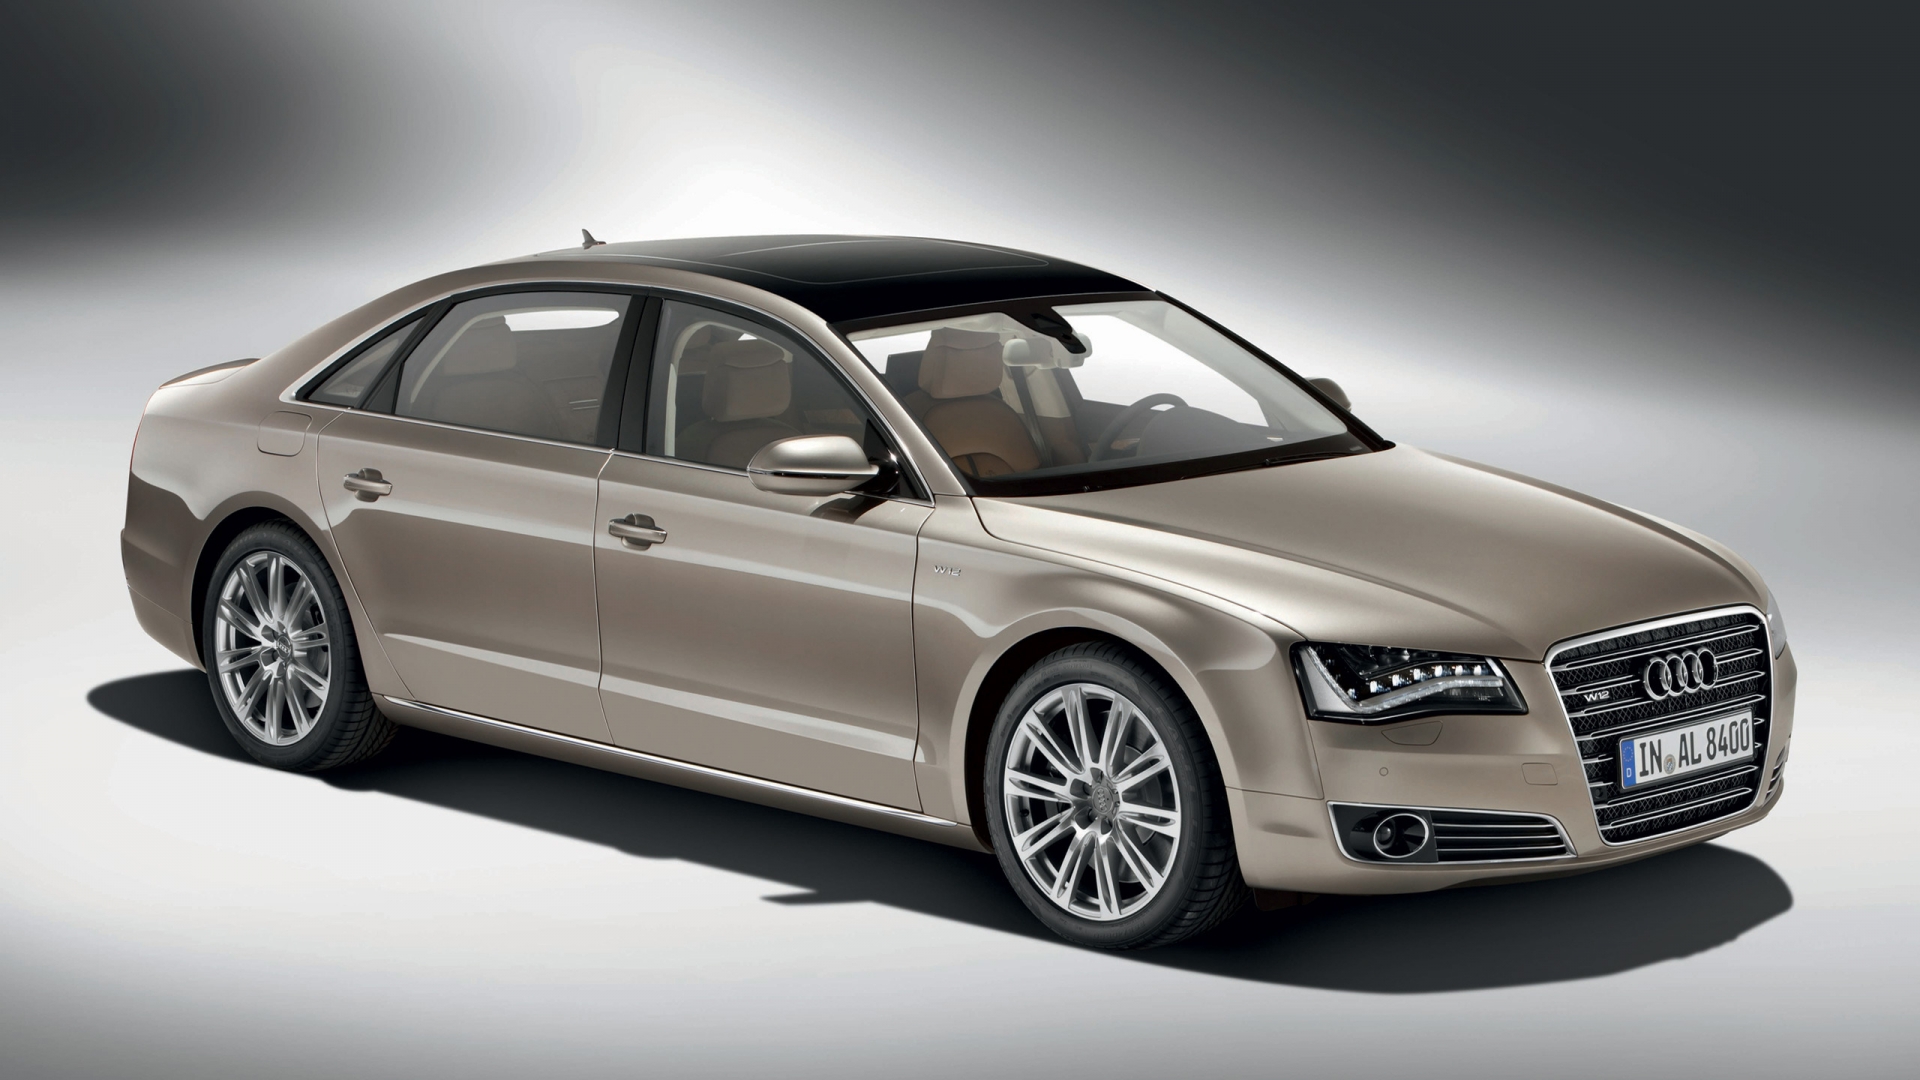 Audi A8 W12 2011 for 1920 x 1080 HDTV 1080p resolution